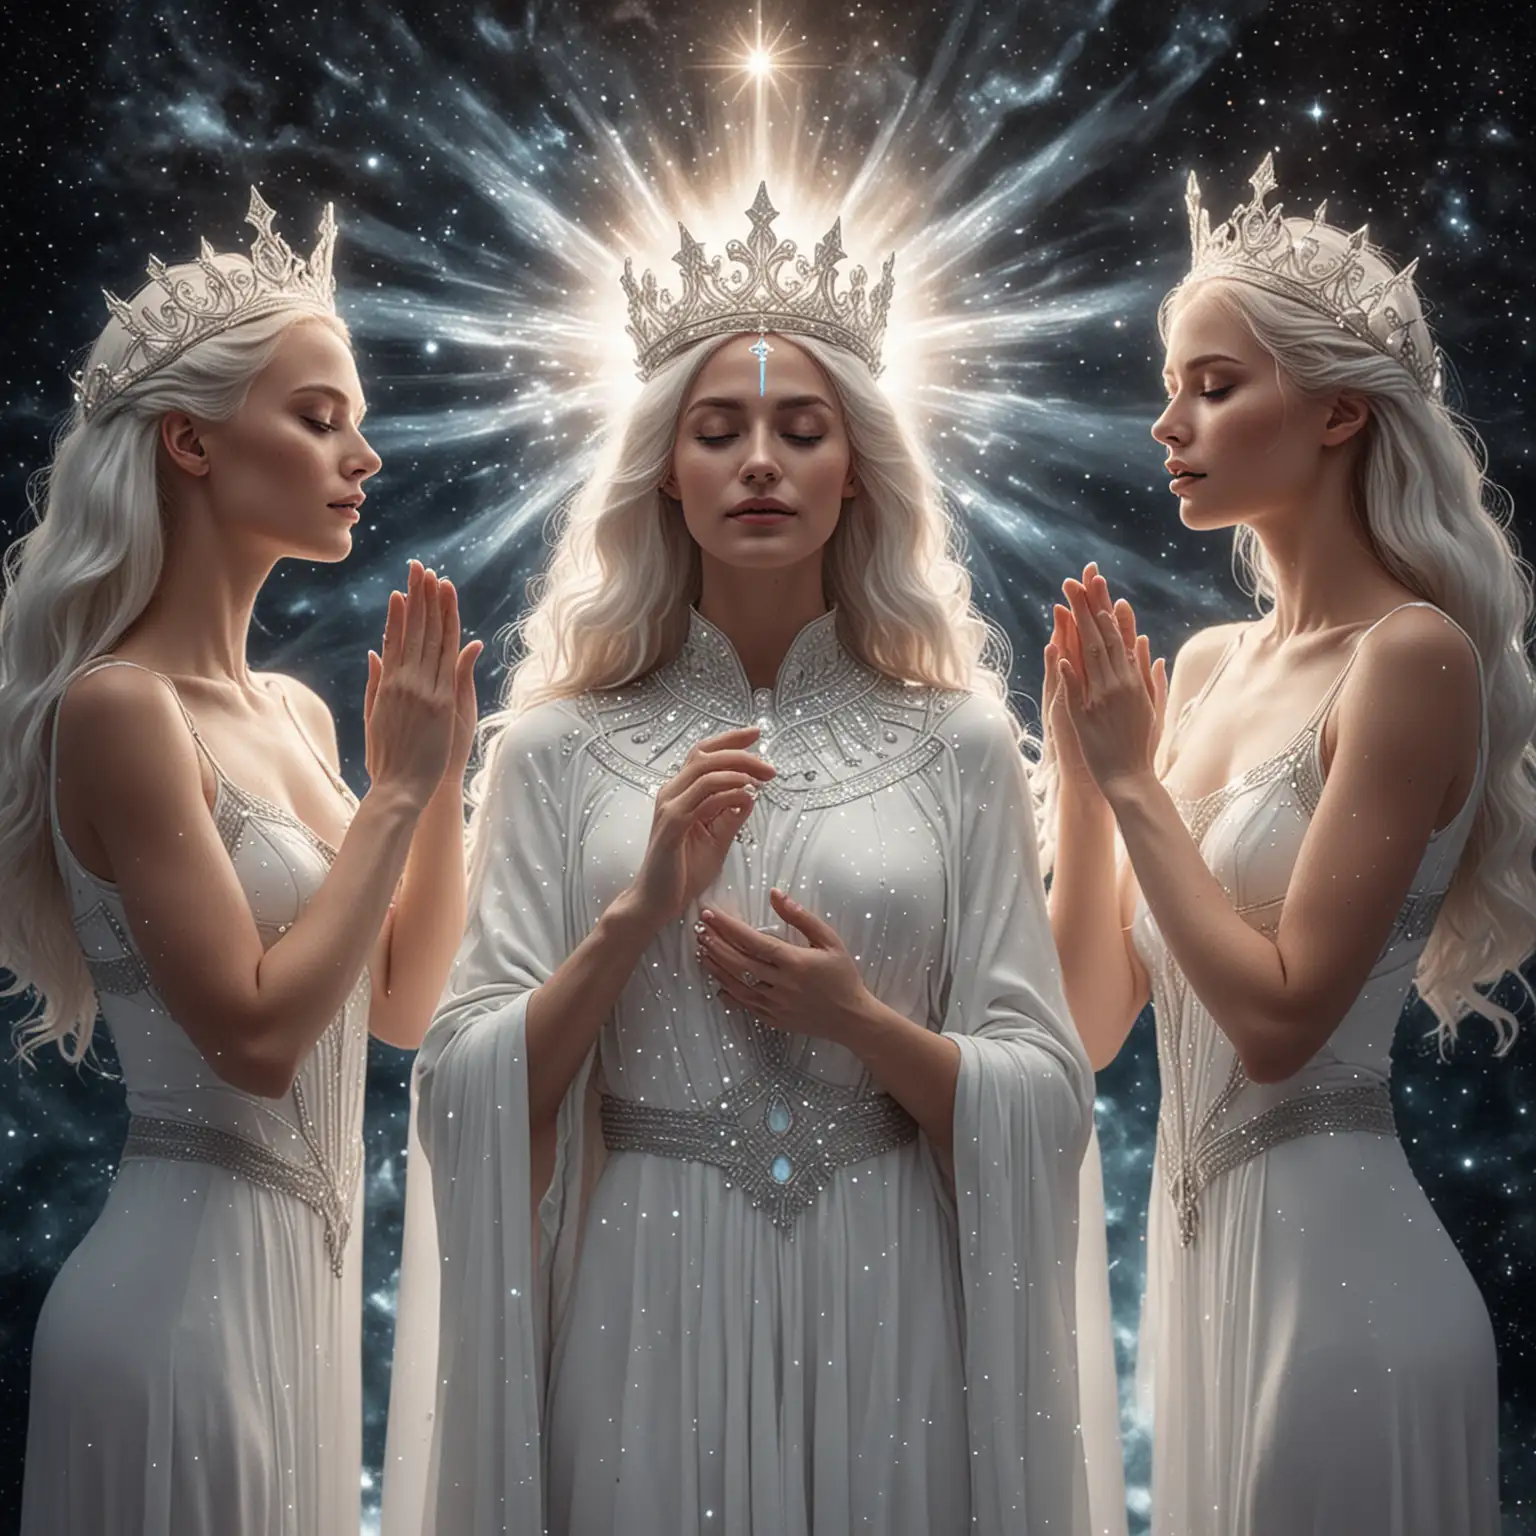 Celestial Coronation Three Galactic Beings Crown Woman in Radiant White amidst Cosmic Background